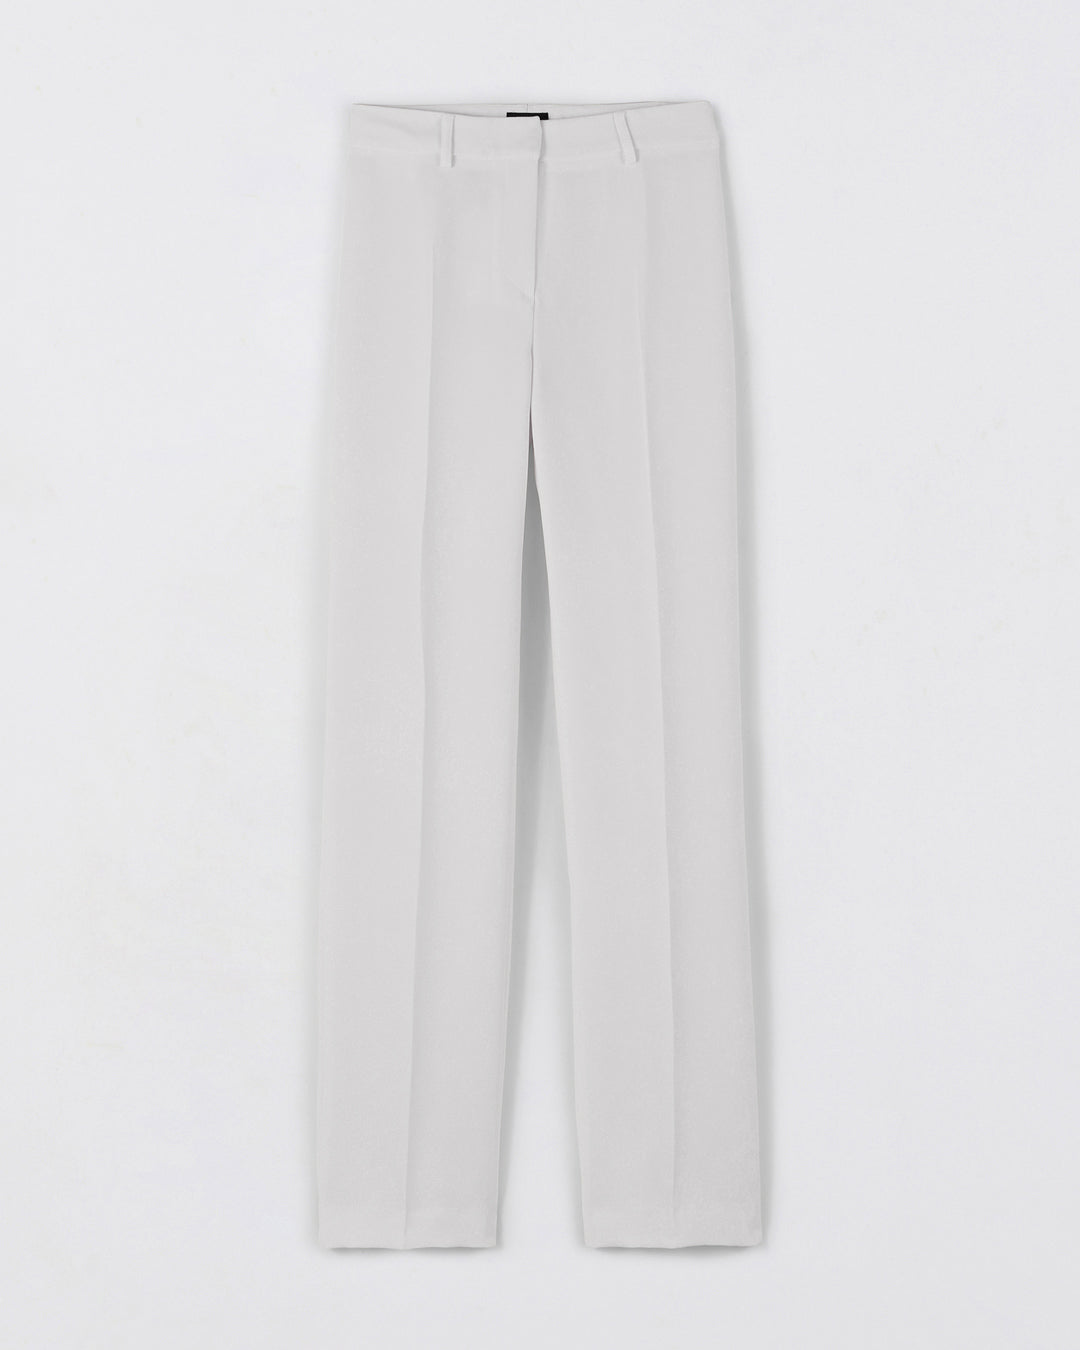 Tailor-pants-white-Straight-cut-High-waist-Ply-for-a-straight-dress-Belt-passers-17H10-tailors-for-women-paris-